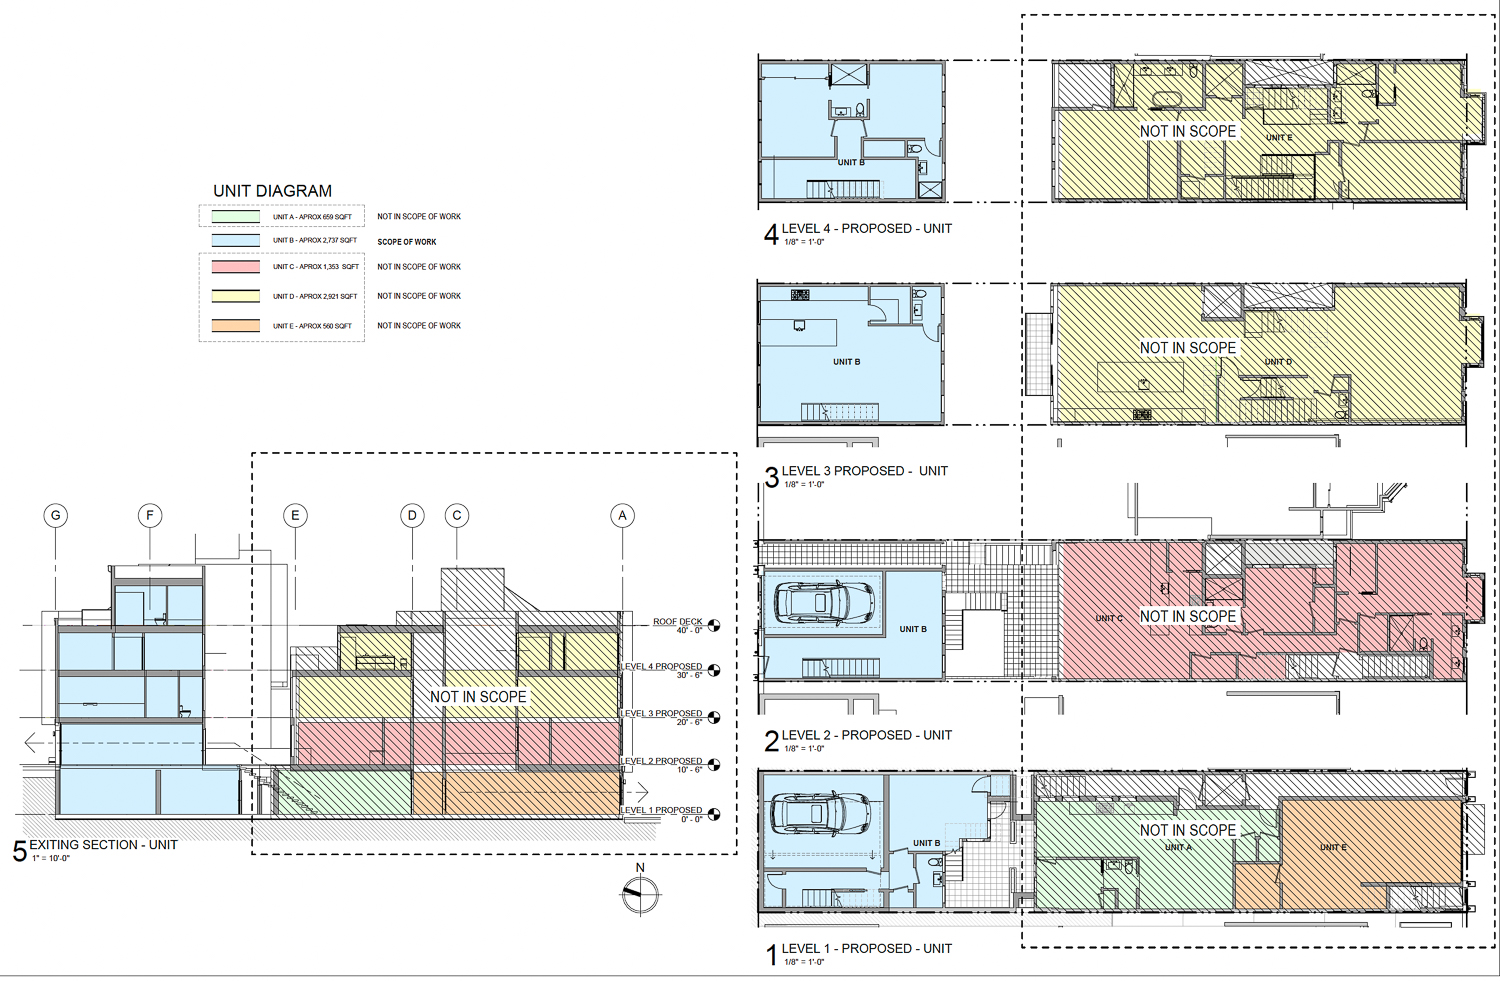 2536 California Street floor plans for the two structures, rendering by EAG Studio